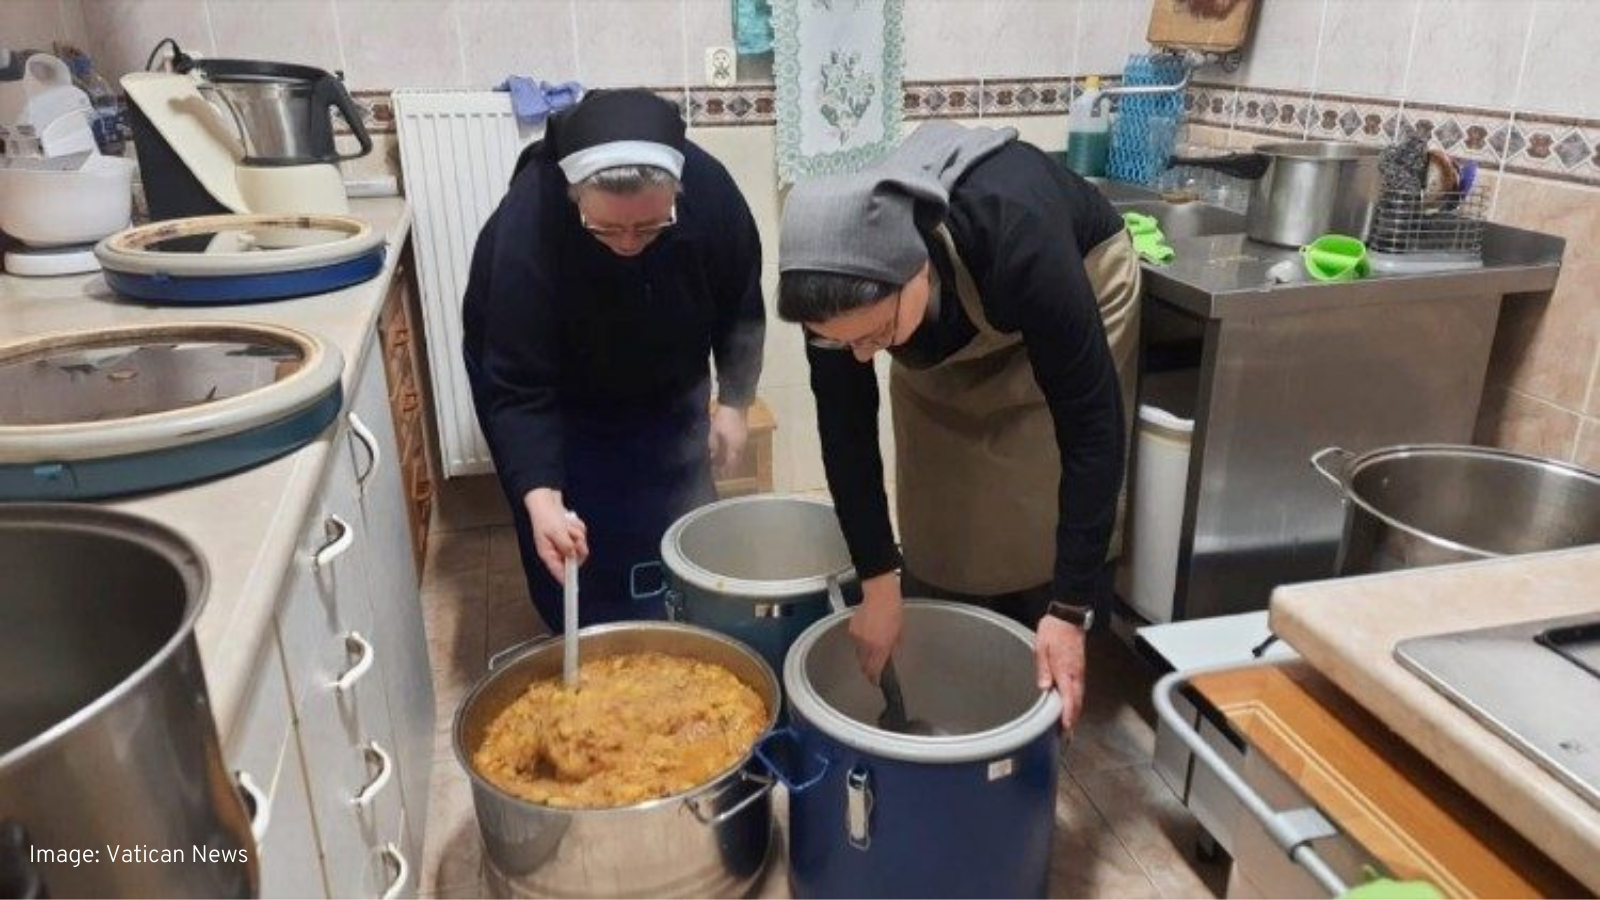 Church in action: Nuns open the doors to Ukrainian refugees